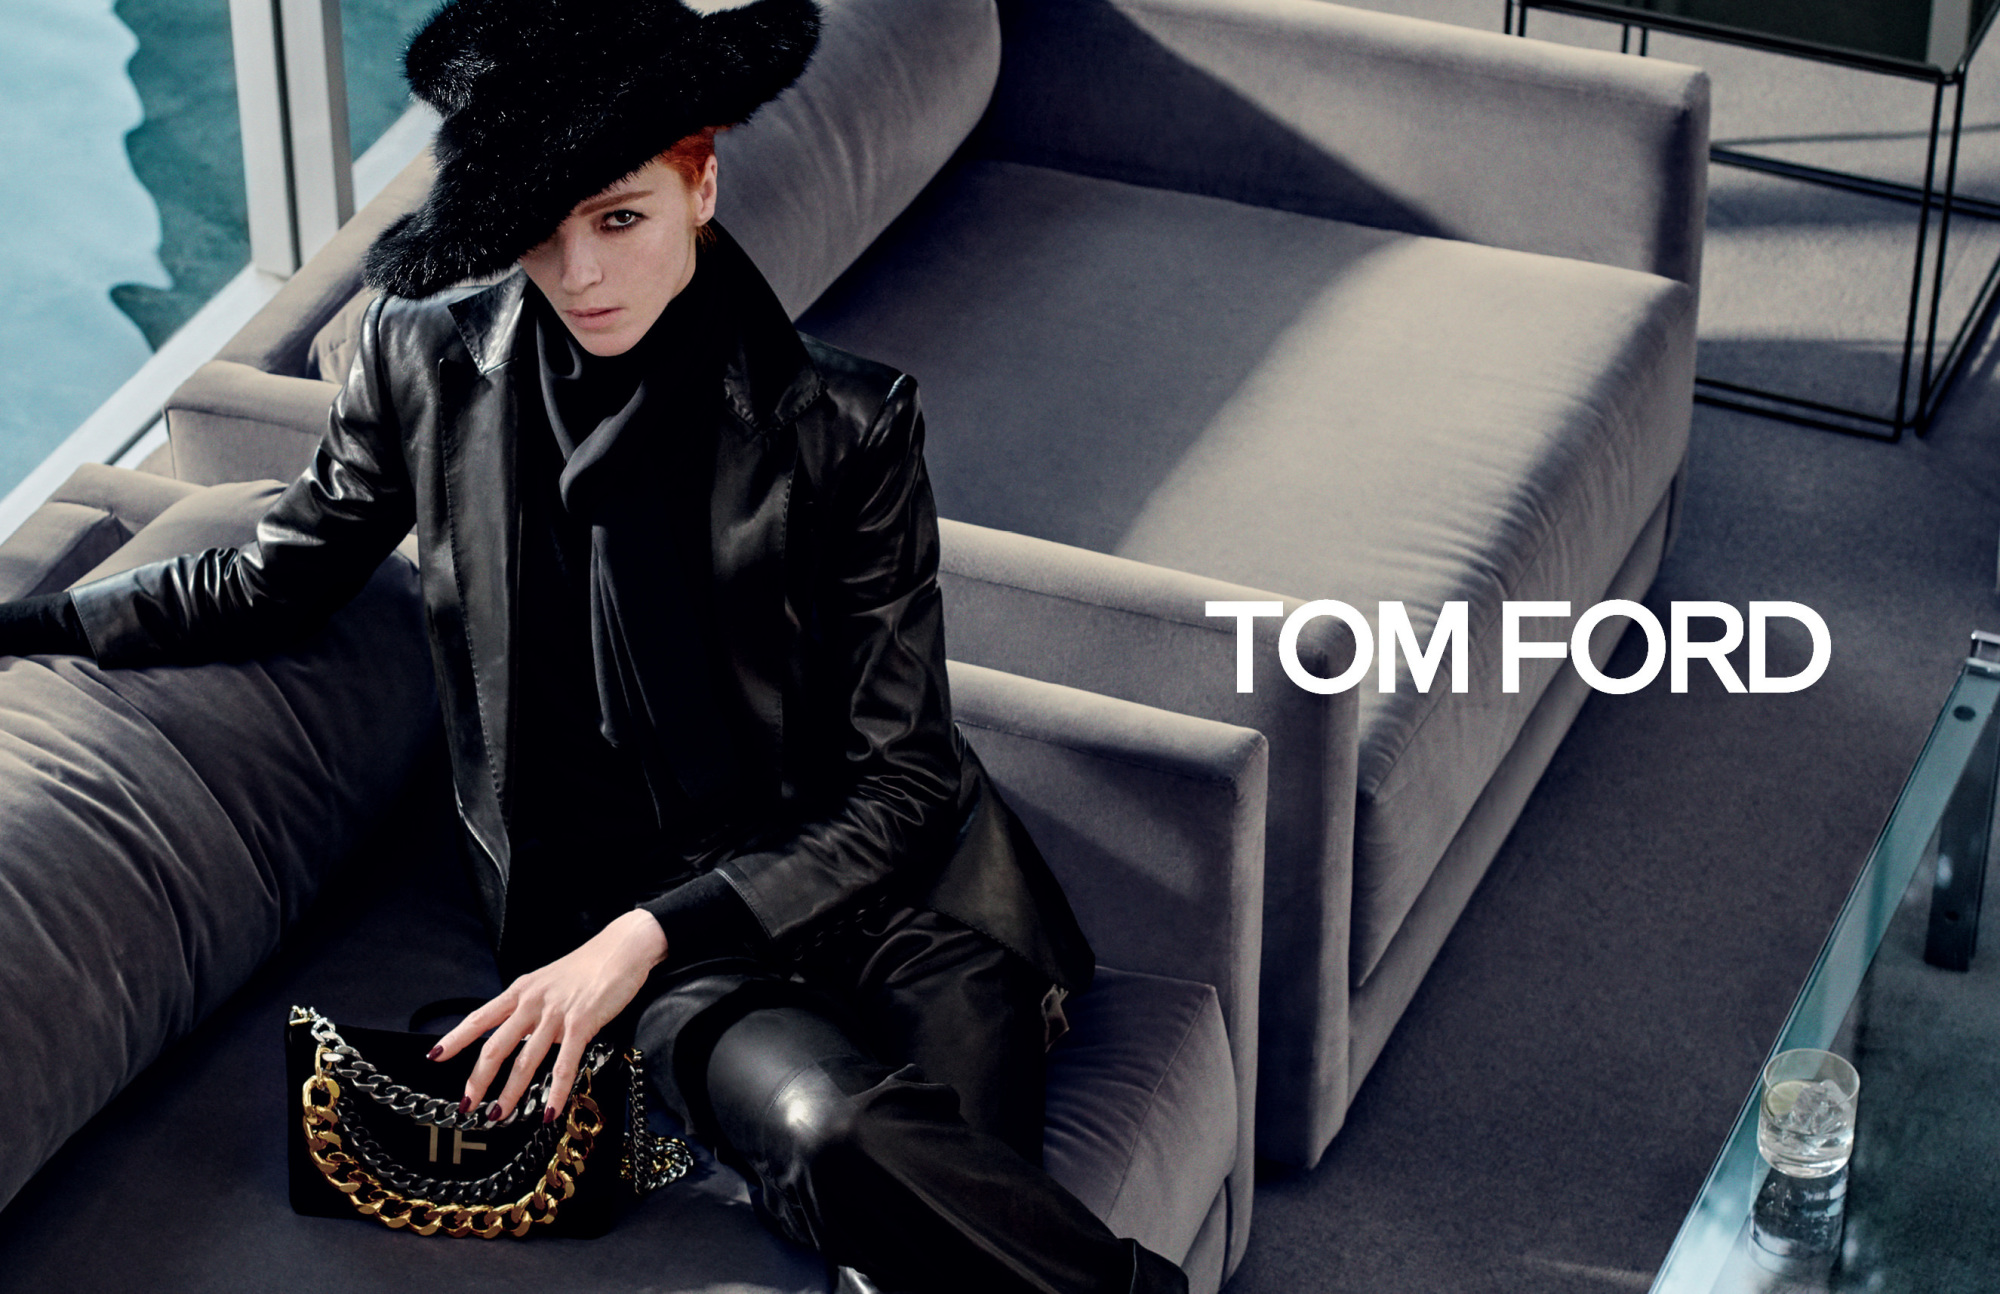 Tom Ford Fall Winter 2019-20 Ad Campaign